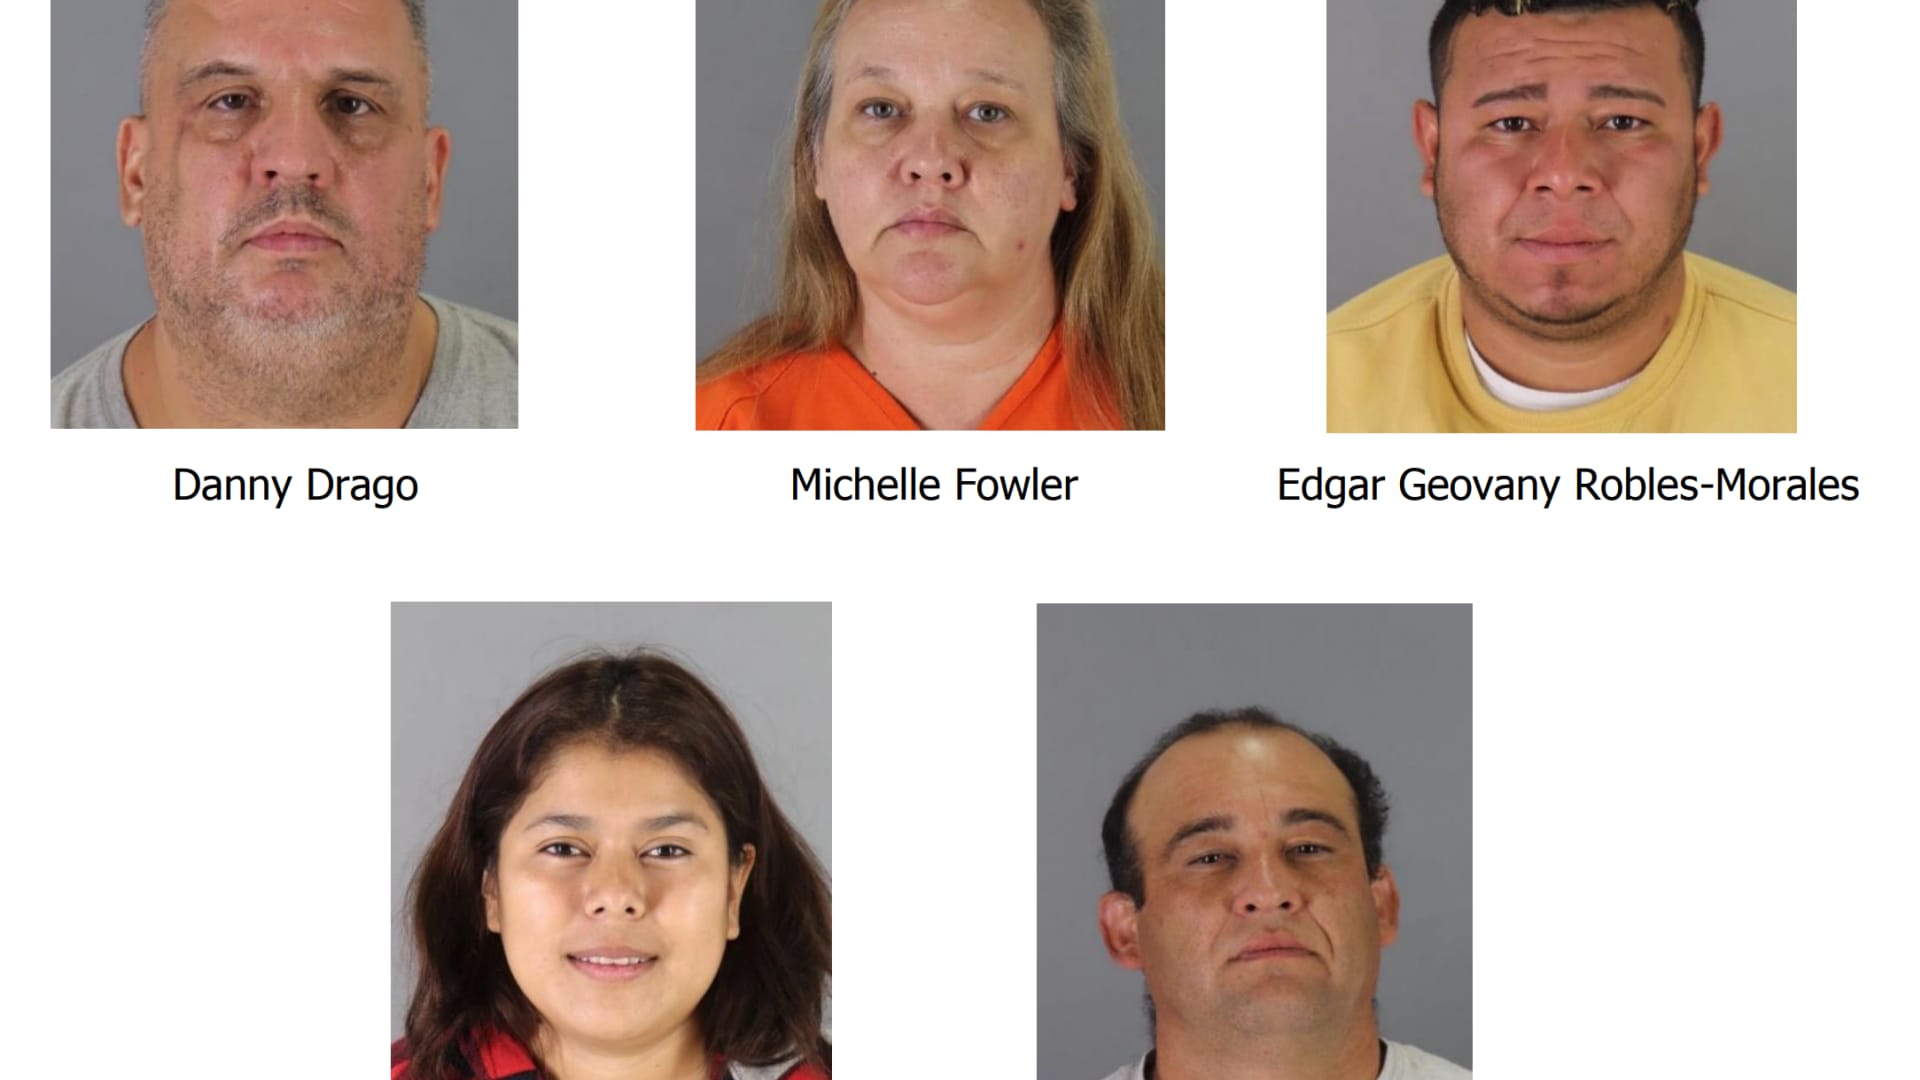 Five members of an organized retail crime ring pleaded guilty to the theft of millions of dollars of goods in 2021 in San Mateo County, California. $8 million of stolen goods were seized in what law enforcement says is the biggest organized crime ring bust in California history.